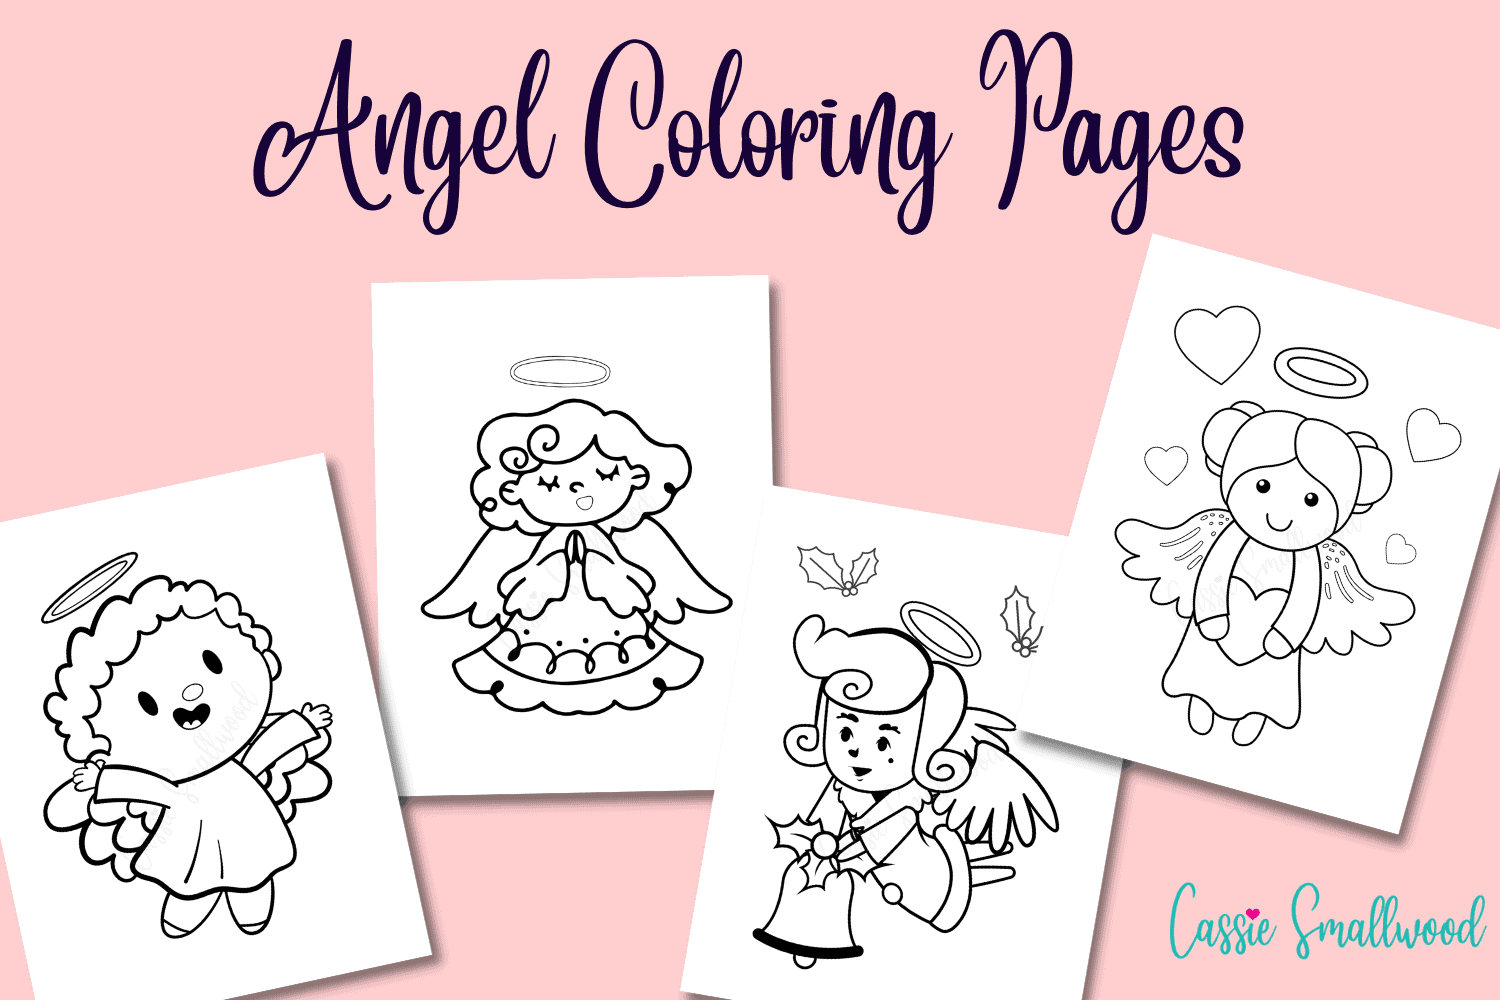 20 Unbelievably Cute Angel Coloring Pages   Cassie Smallwood